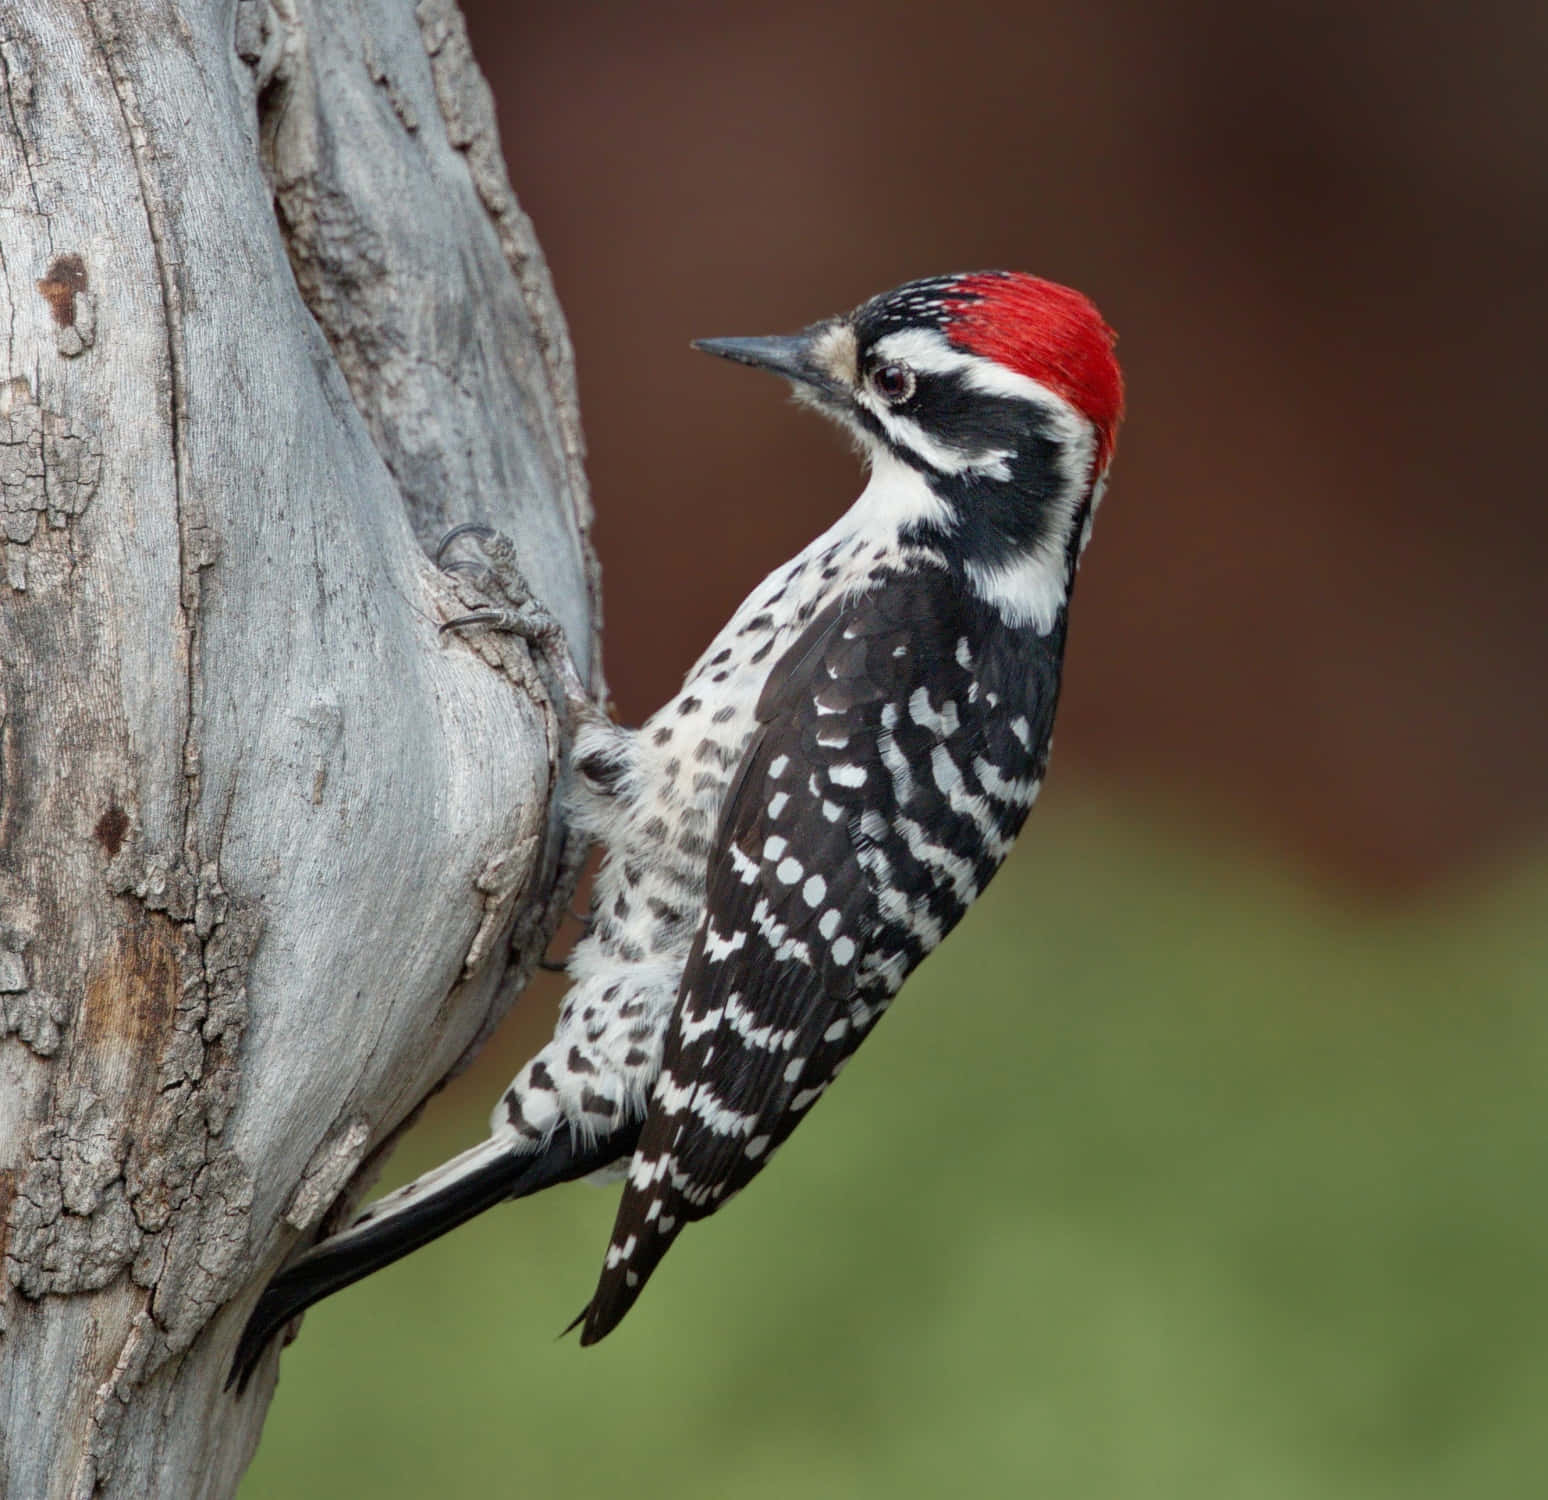 A colorful woodpecker about to peck into a tree for breakfast.